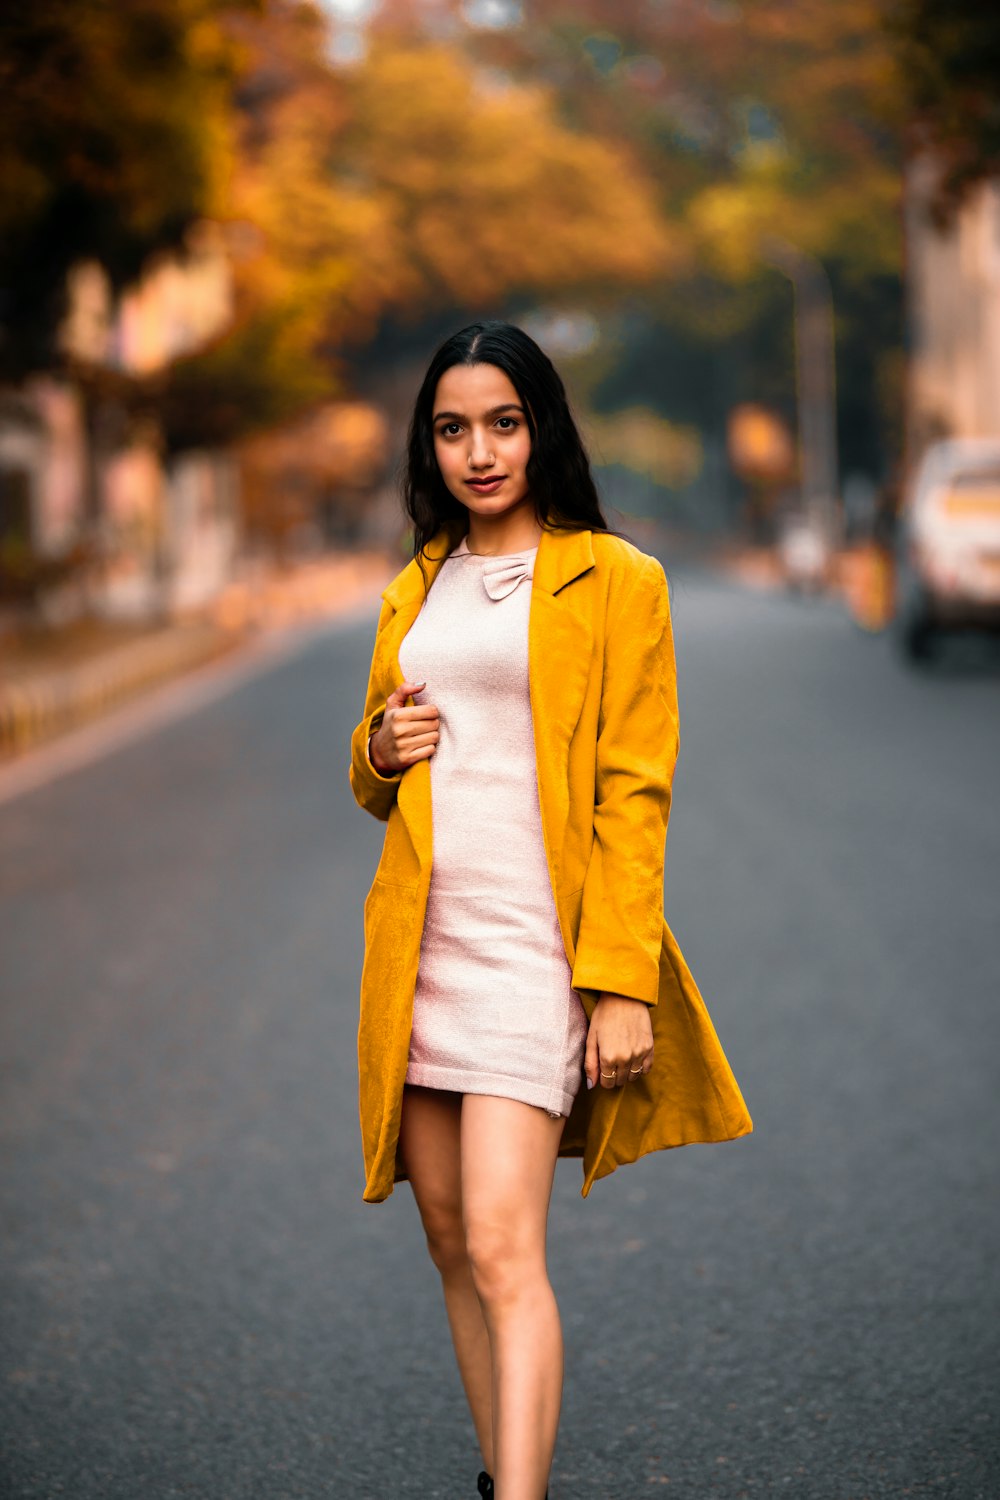 woman in yellow blazer standing on road during daytime